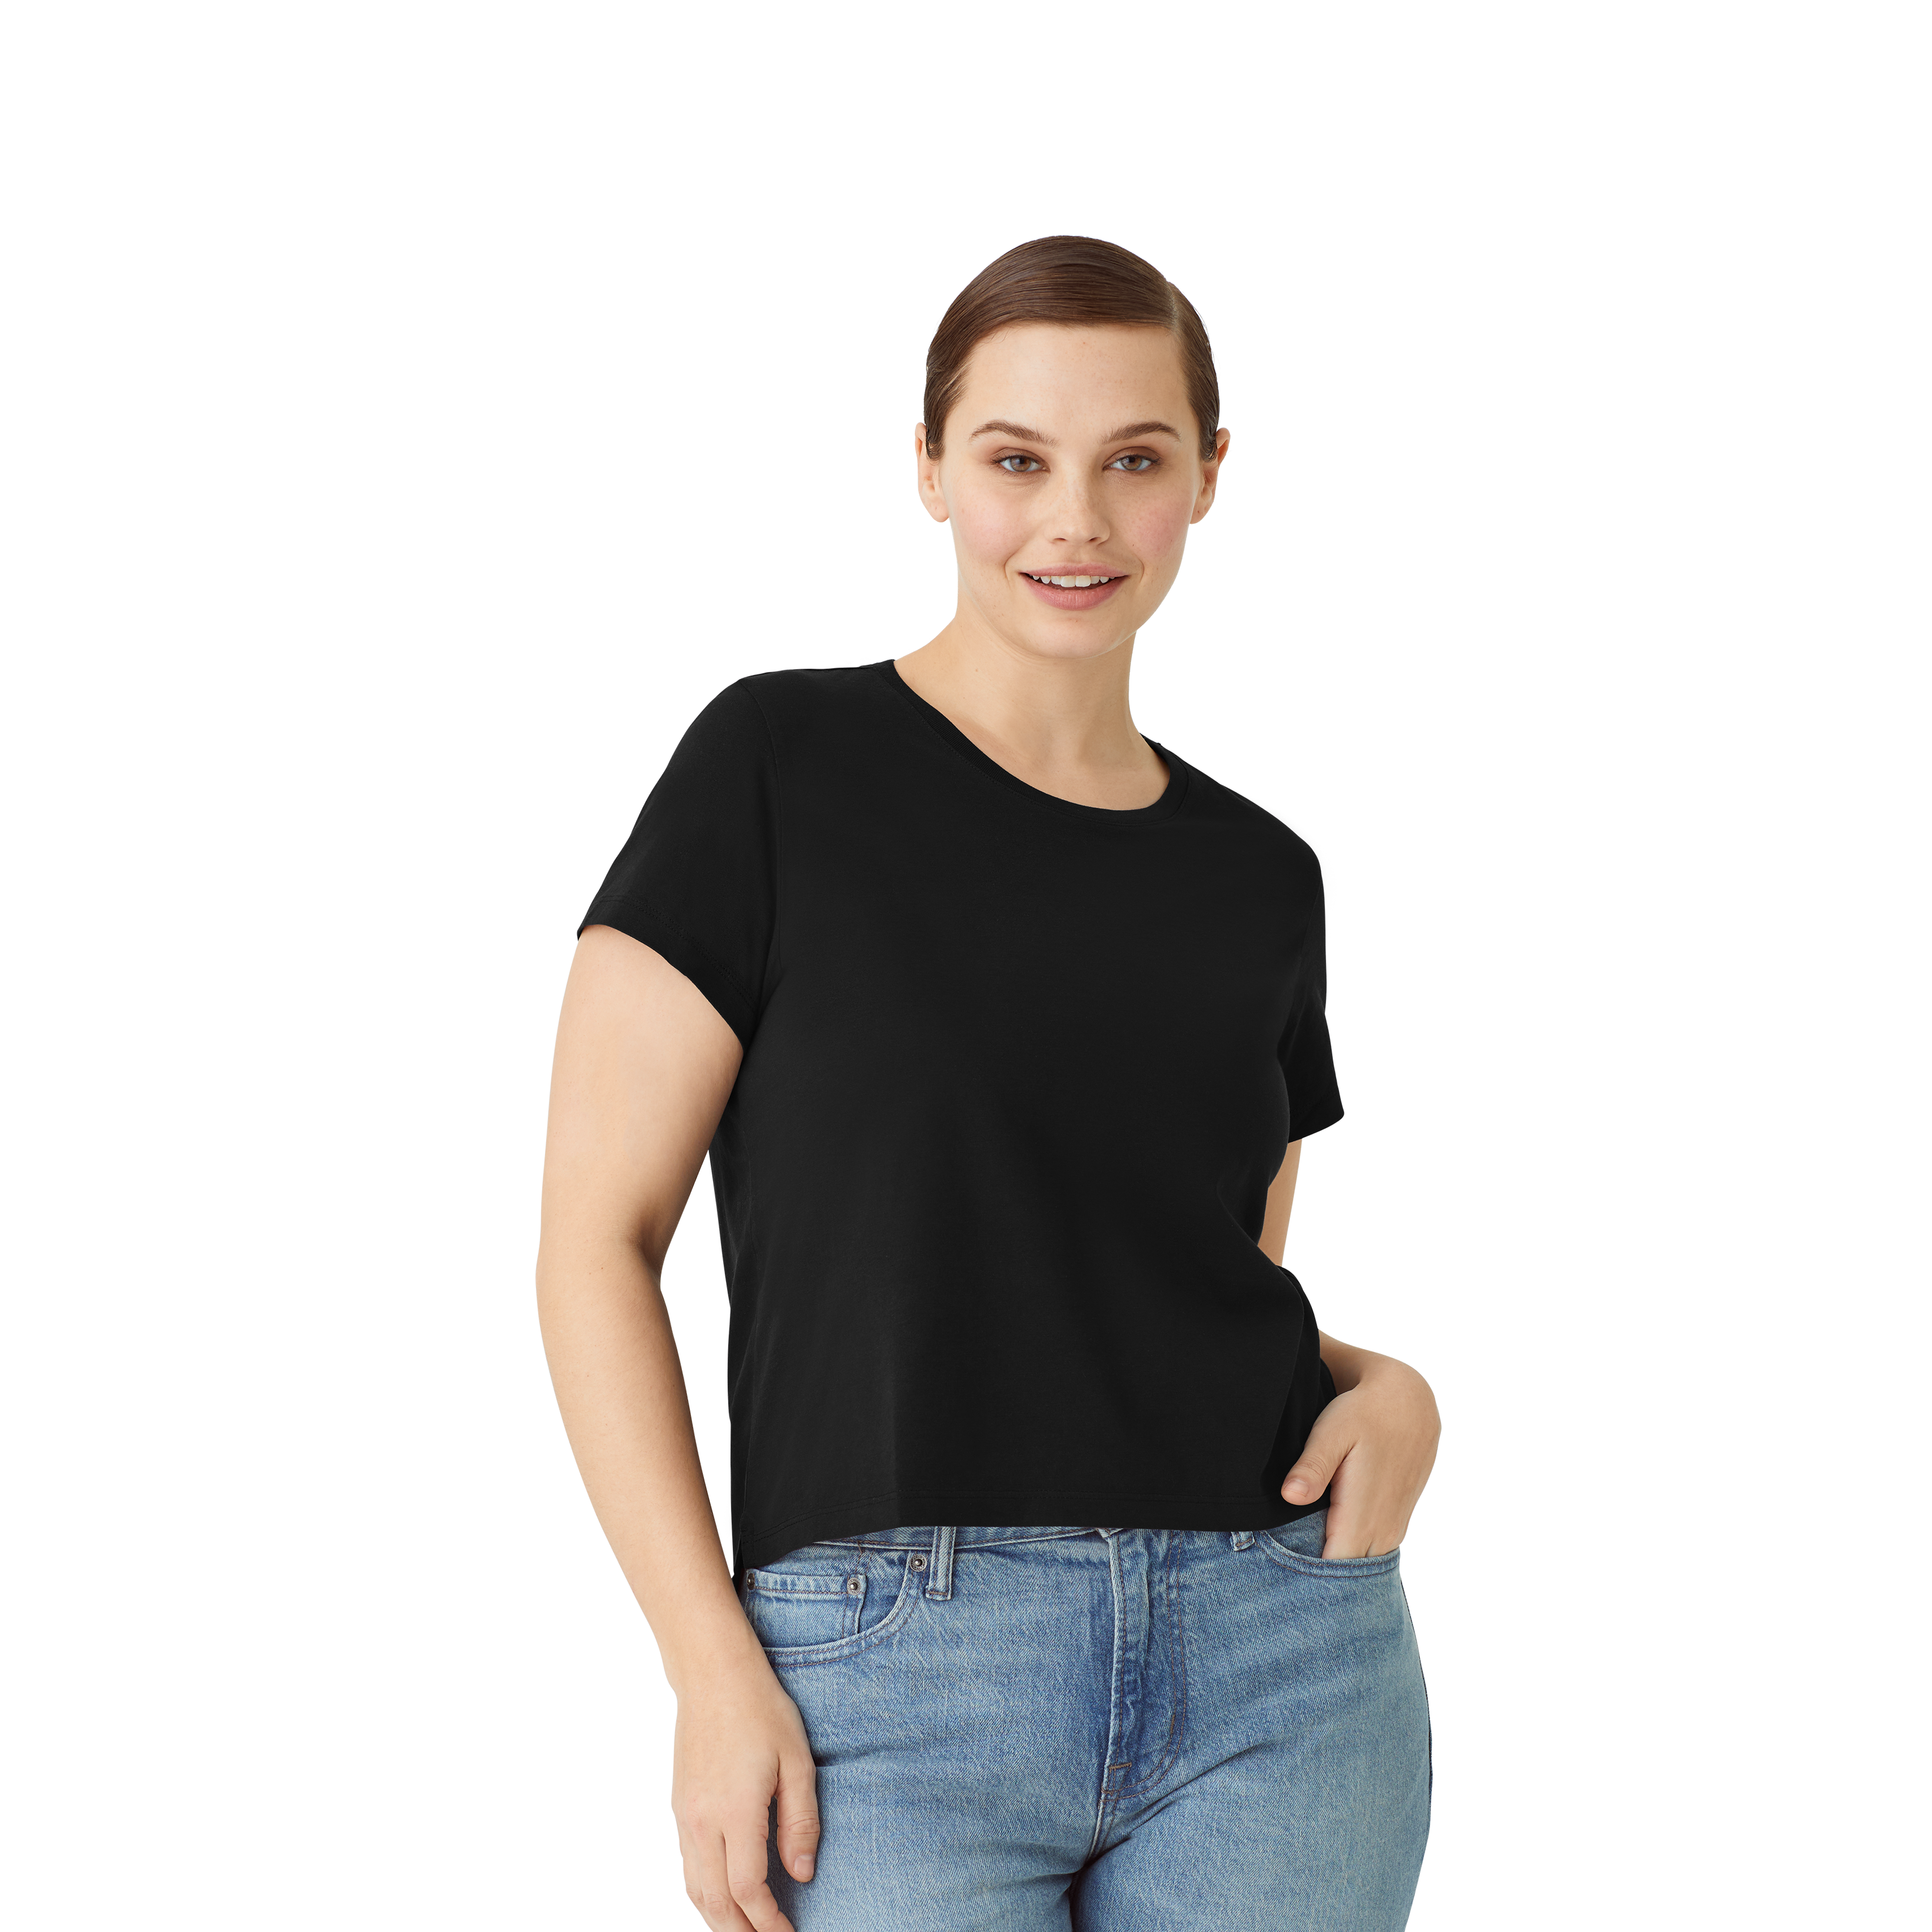 All Yours cropped Pima cotton T-shirt